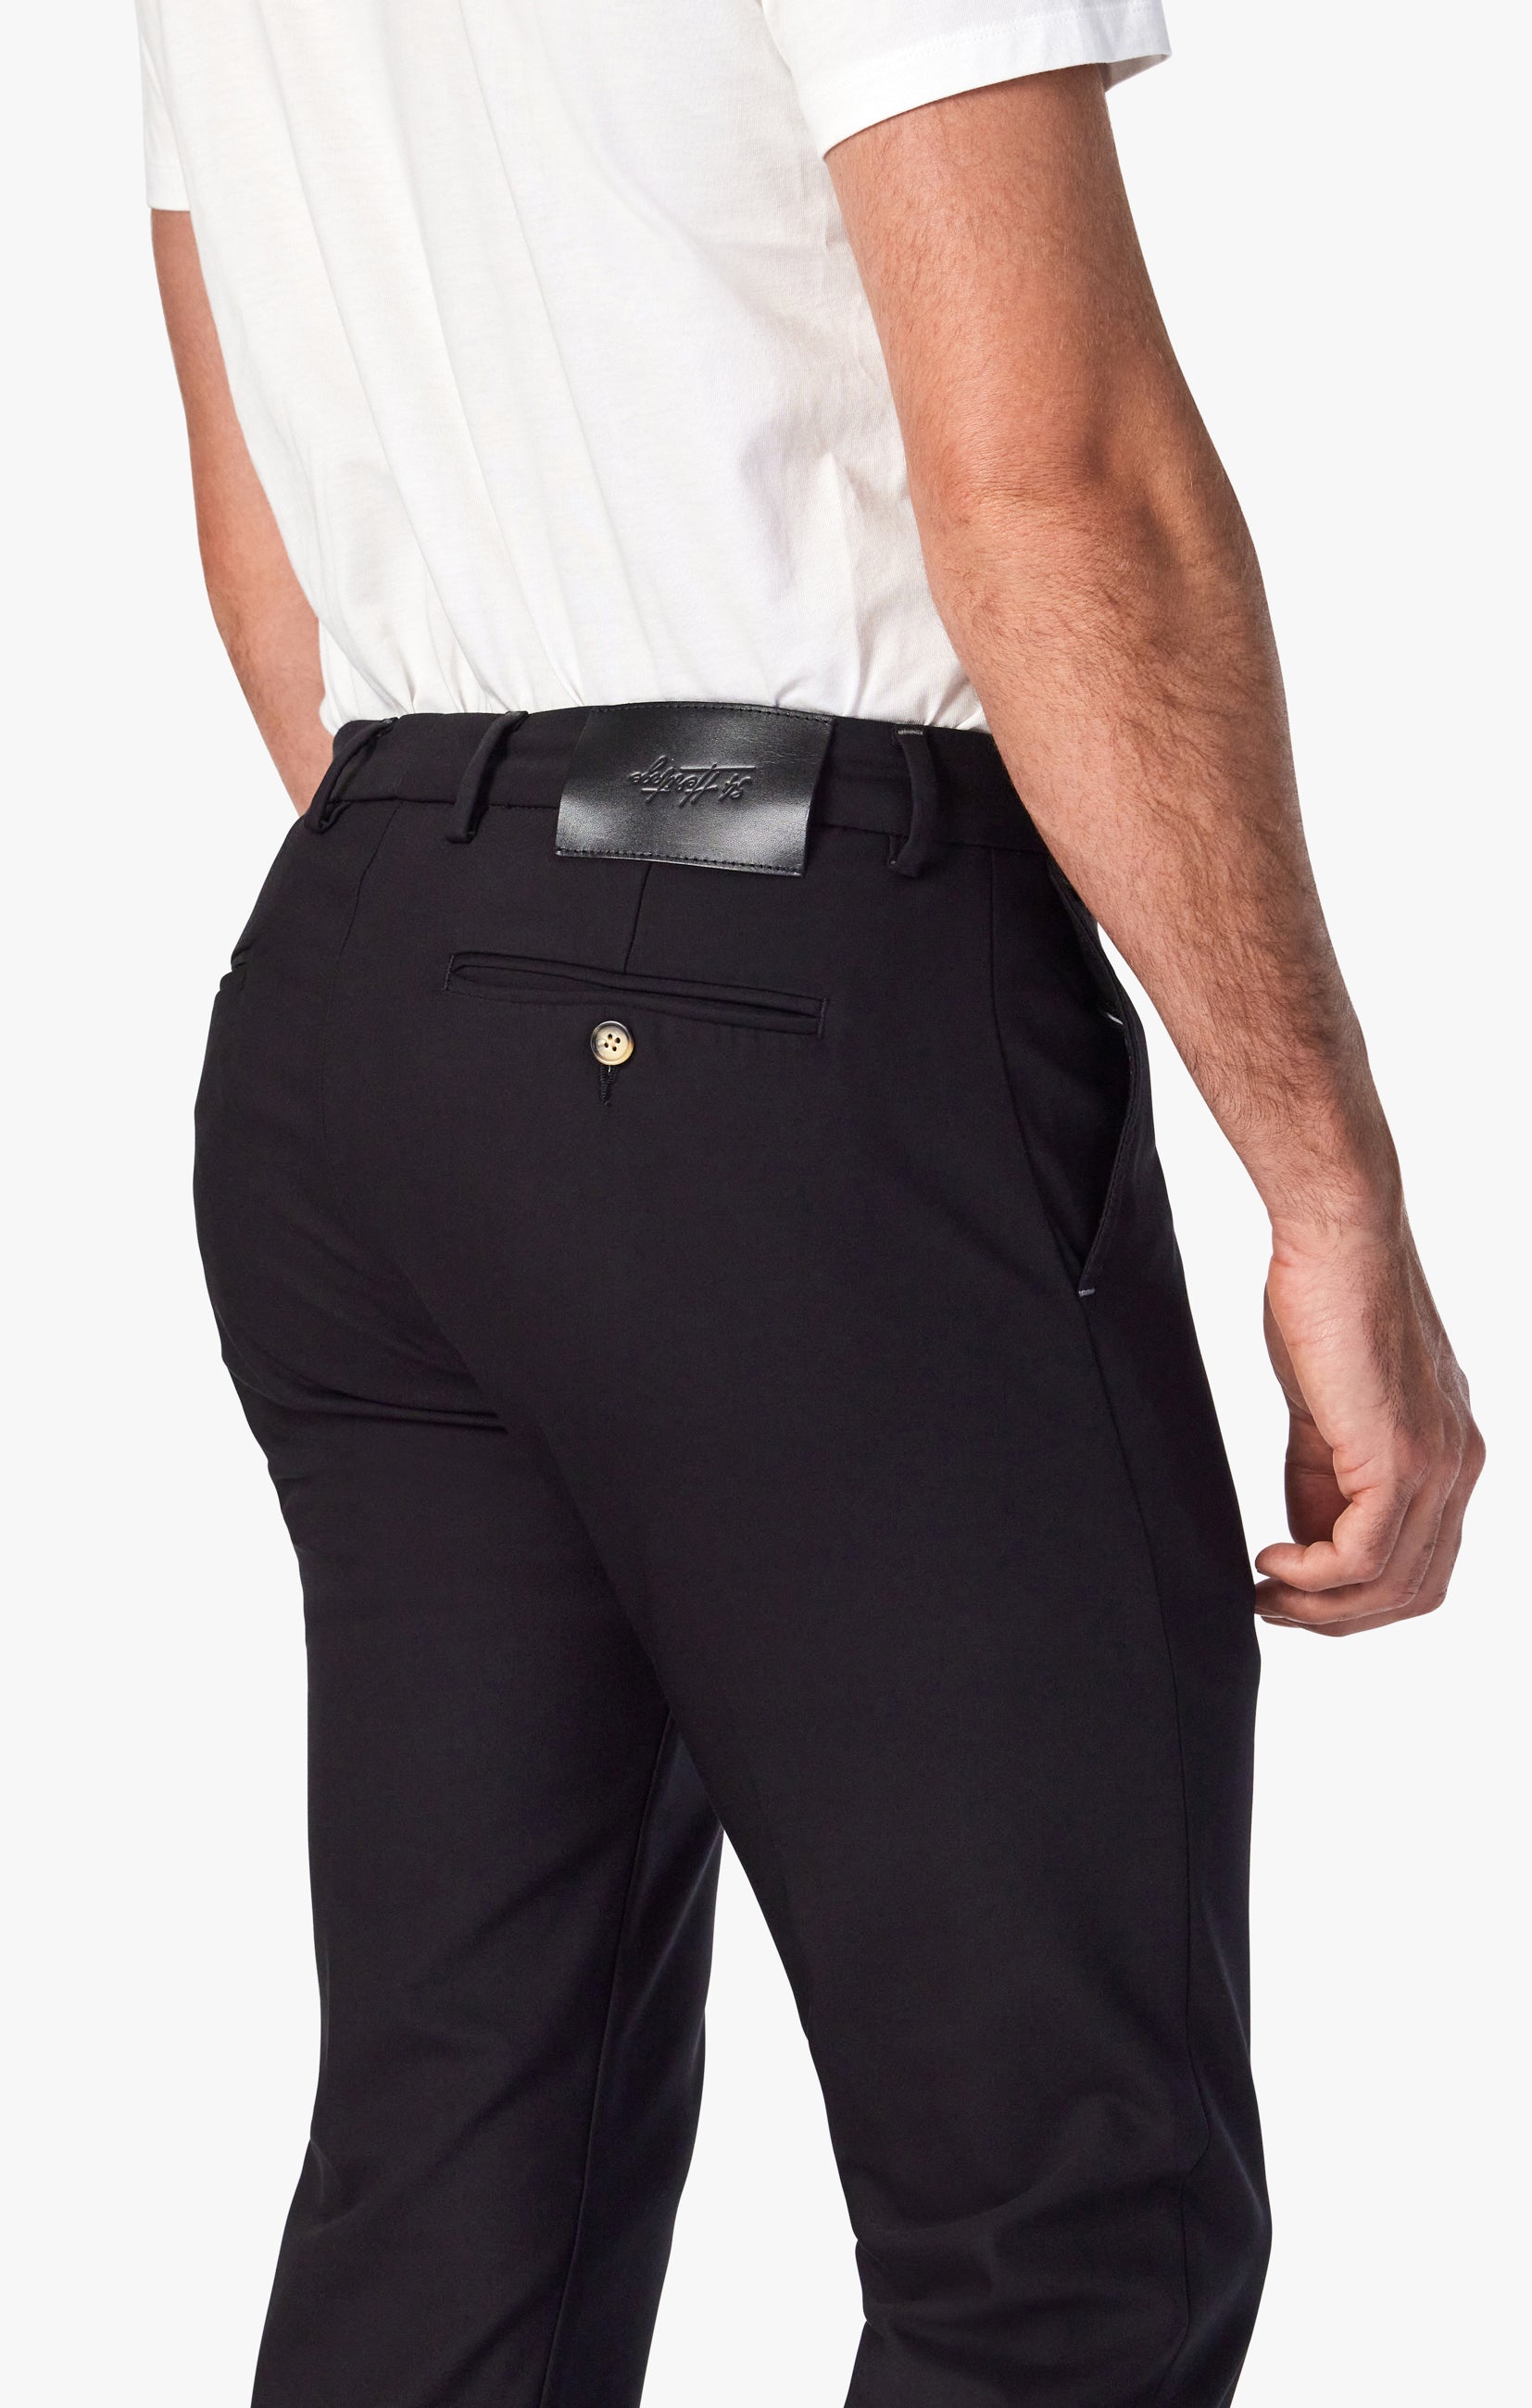  Obla Men's Golf Pants - 30/32/34 Slim Fit Stretch  Lightweight Trousers with 5 Pockets Casual Travel Dress Work Pants for Men  (Black_L30 W30) : Clothing, Shoes & Jewelry